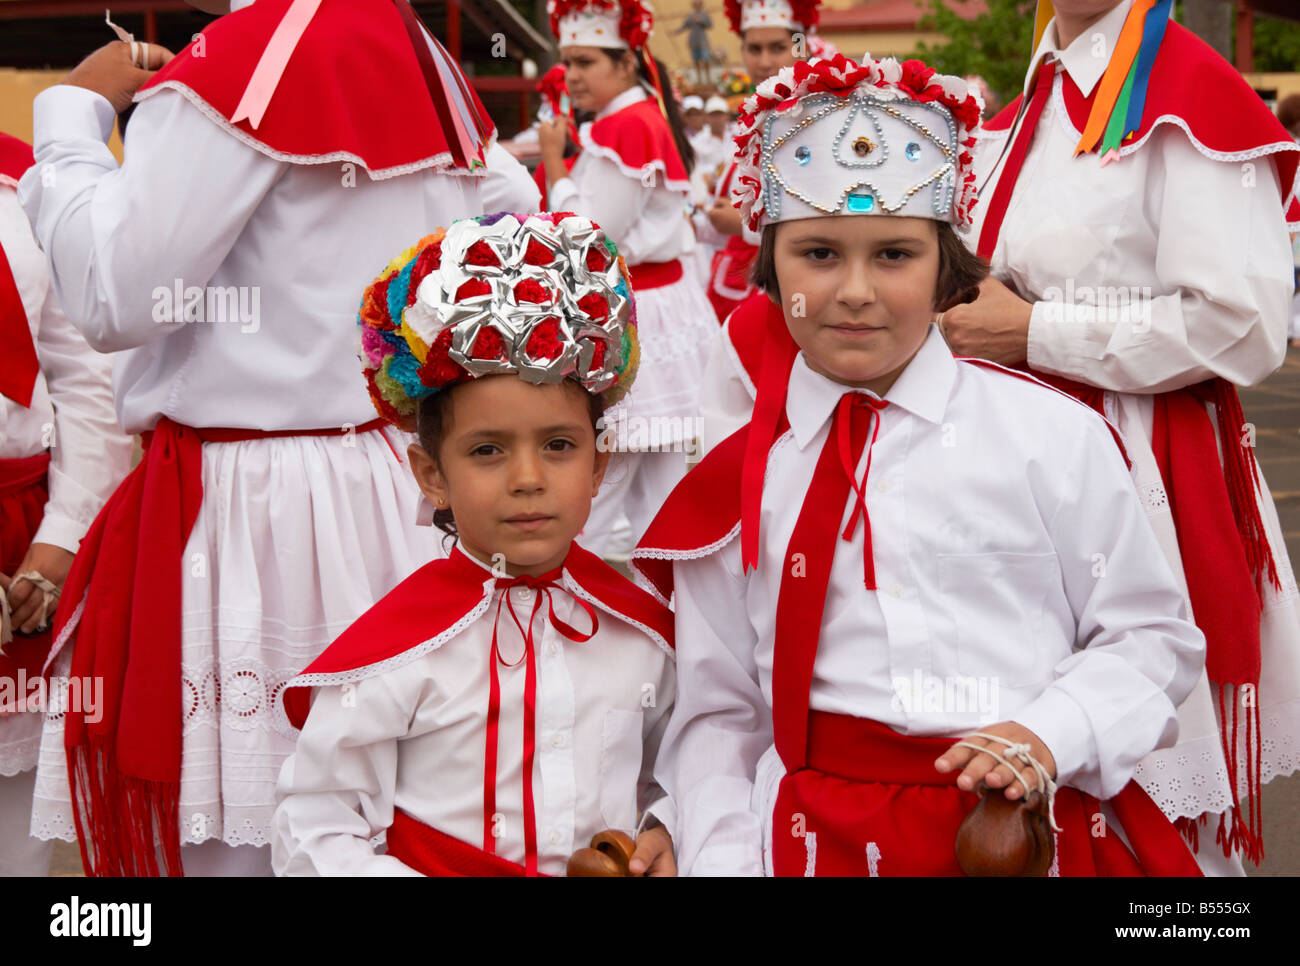 Girls from El Hierro island in the Canary islands in Los Bailarines (dancers) traditional red and white costume at local fiesta Stock Photo